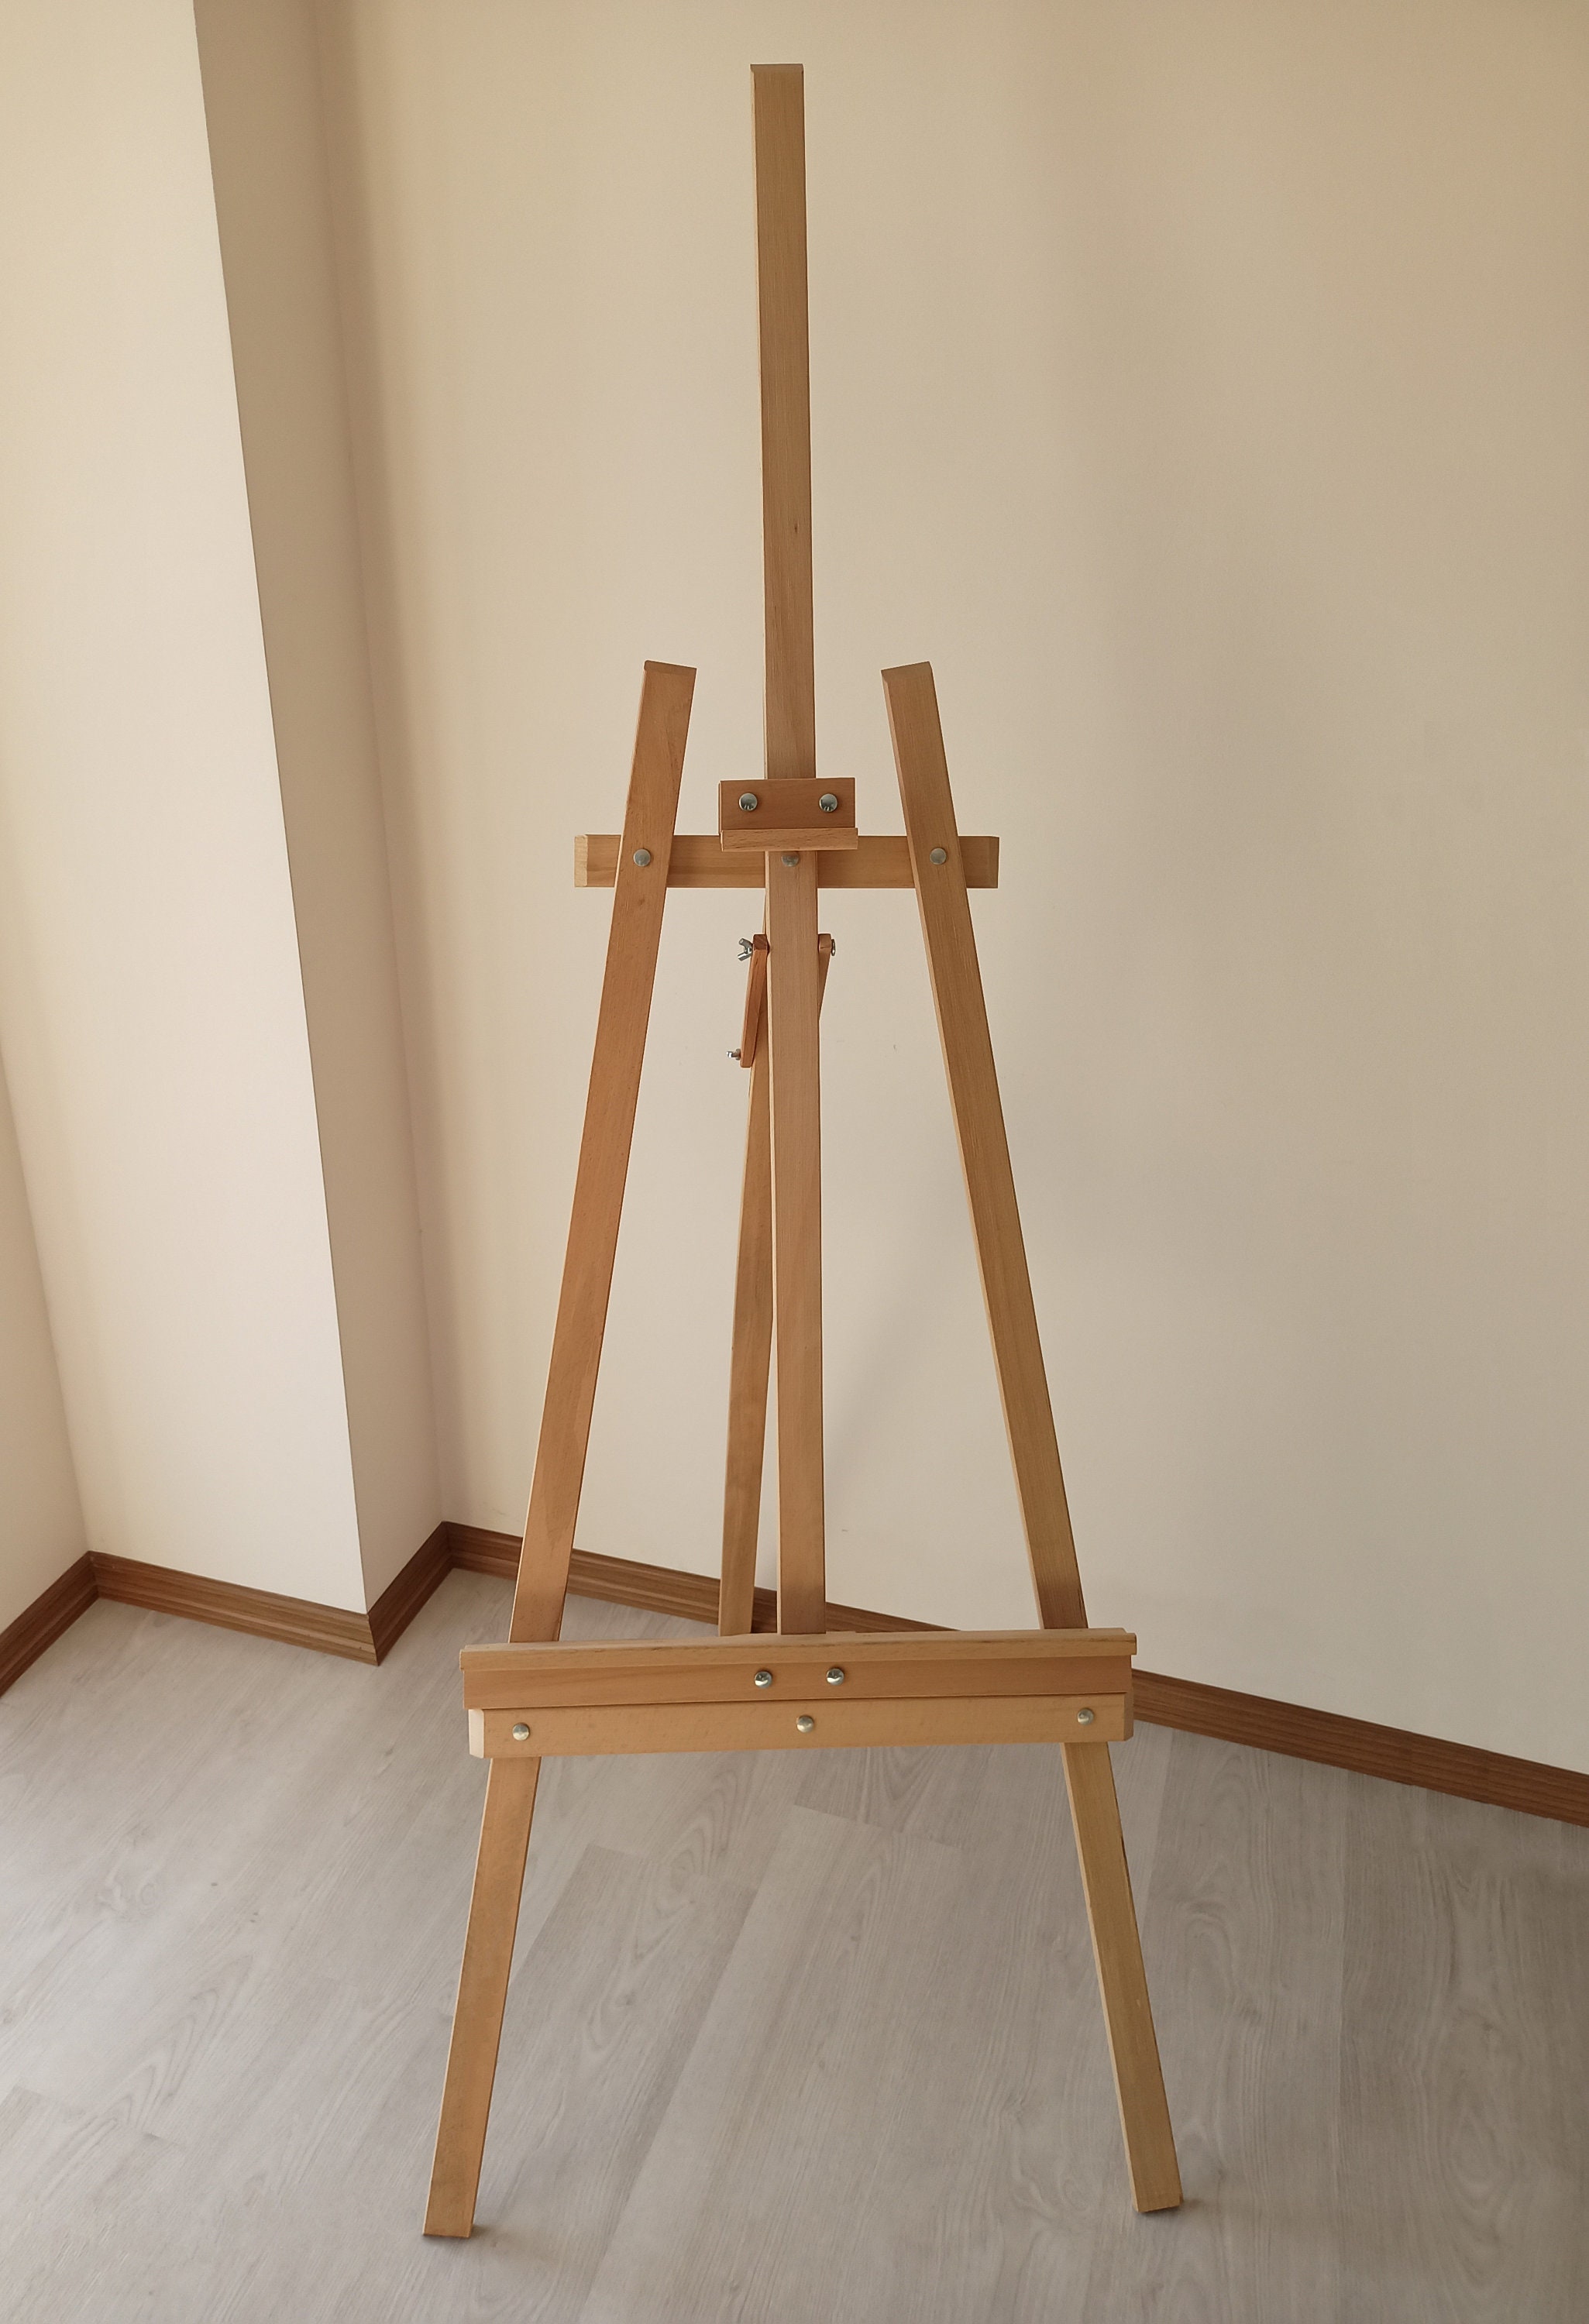 Wooden Picture Easel Wedding Display Photo Stand, Large Easel 